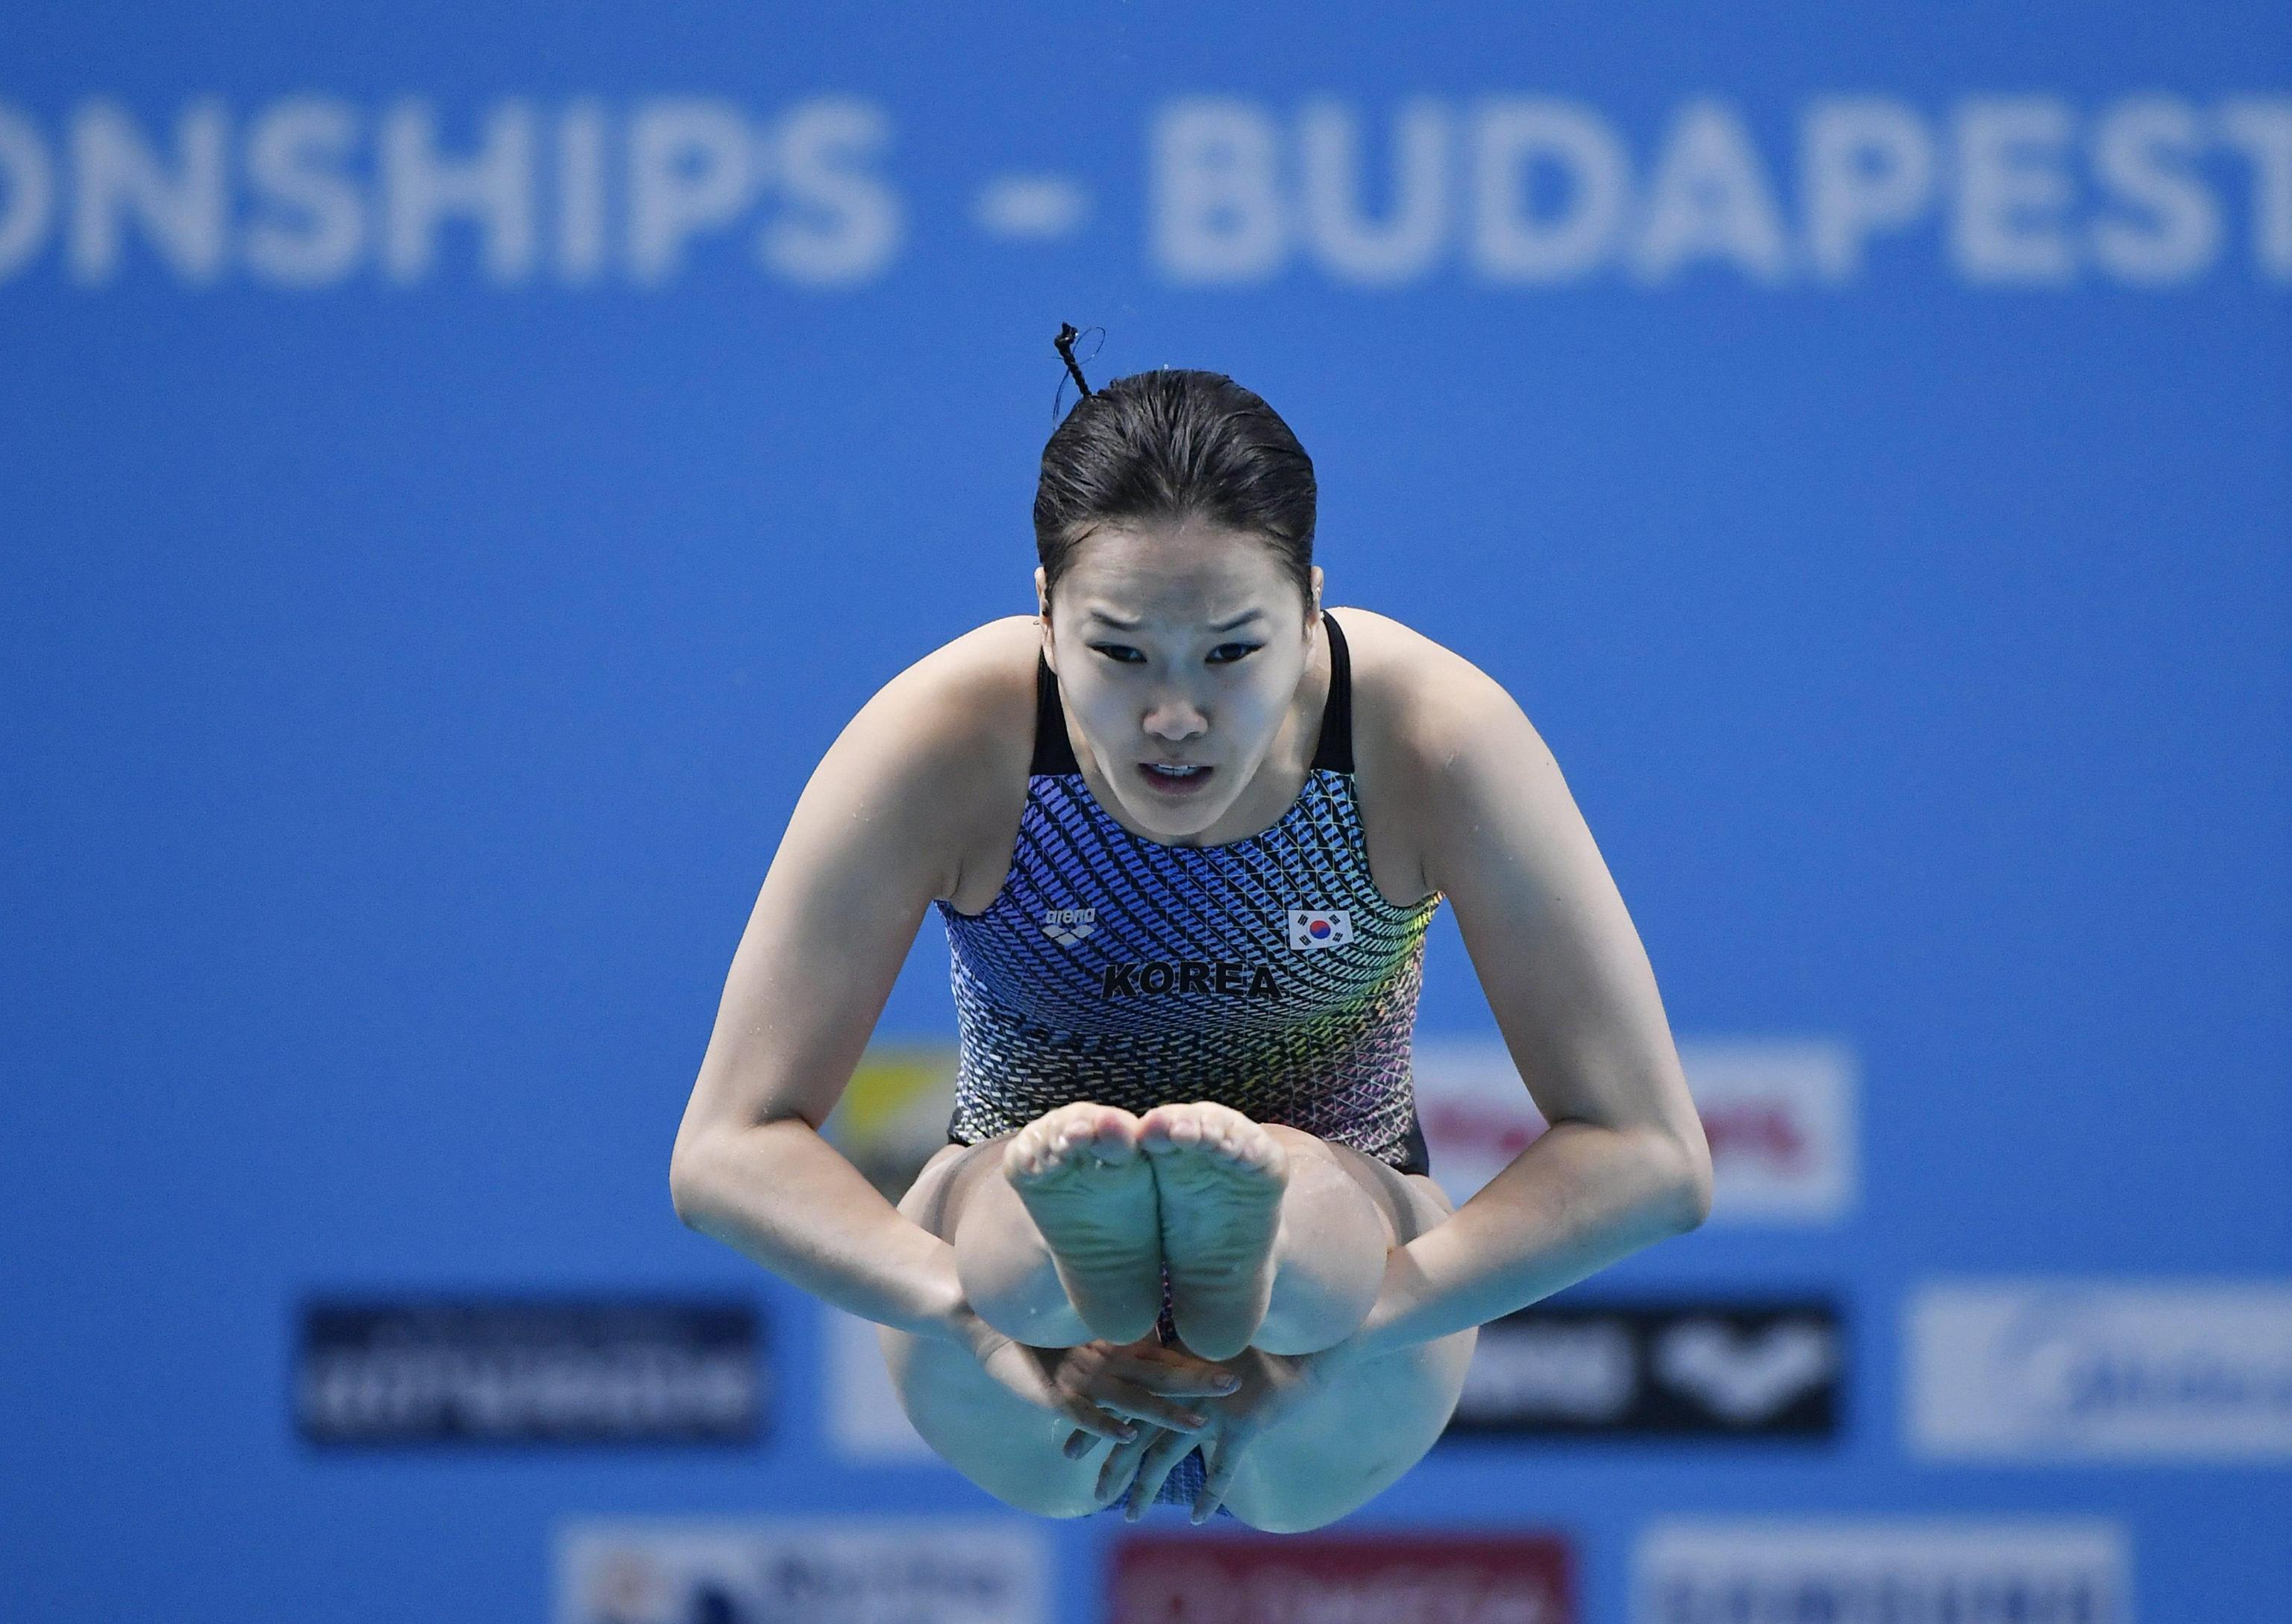 epa06087682 Nayun Moon of South Korea competes in the Women's Diving 1m Springboard preliminary round of the FINA Swimming World Championships 2017 in Duna Arena in Budapest, Hungary, 14 July 2017.  EPA/TIBOR ILLYES HUNGARY OUT